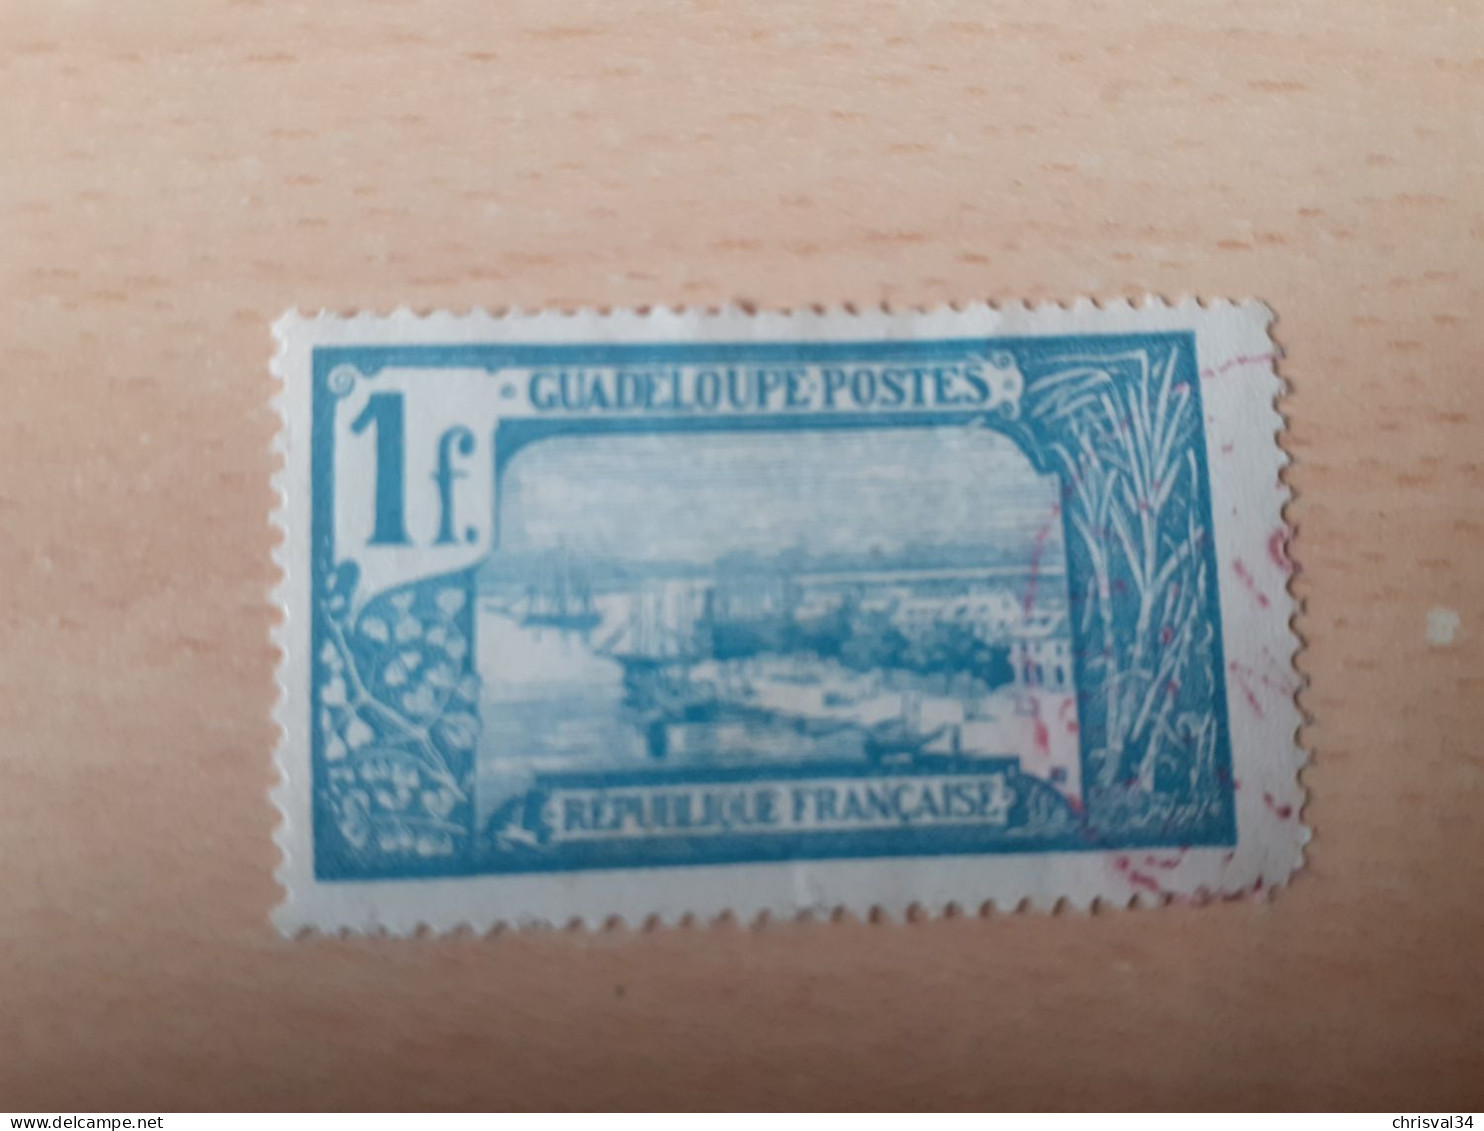 TIMBRE   GUADELOUPE       N  88     COTE  1,25   EUROS  OBLITERE - Used Stamps